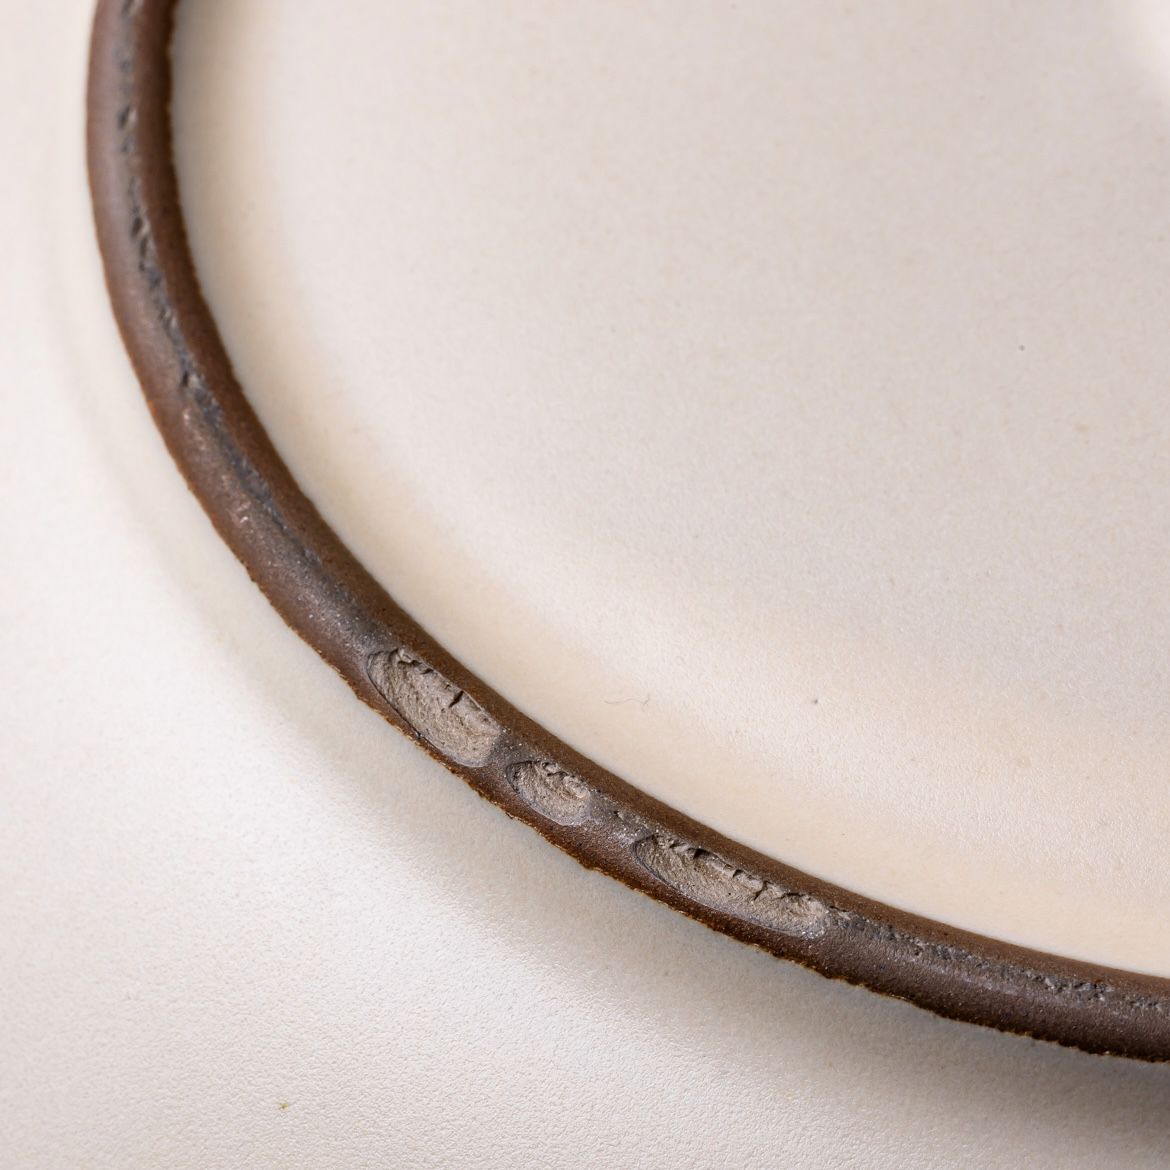 A closeup of an unglazed edge on a ceramic plate with scuffs.